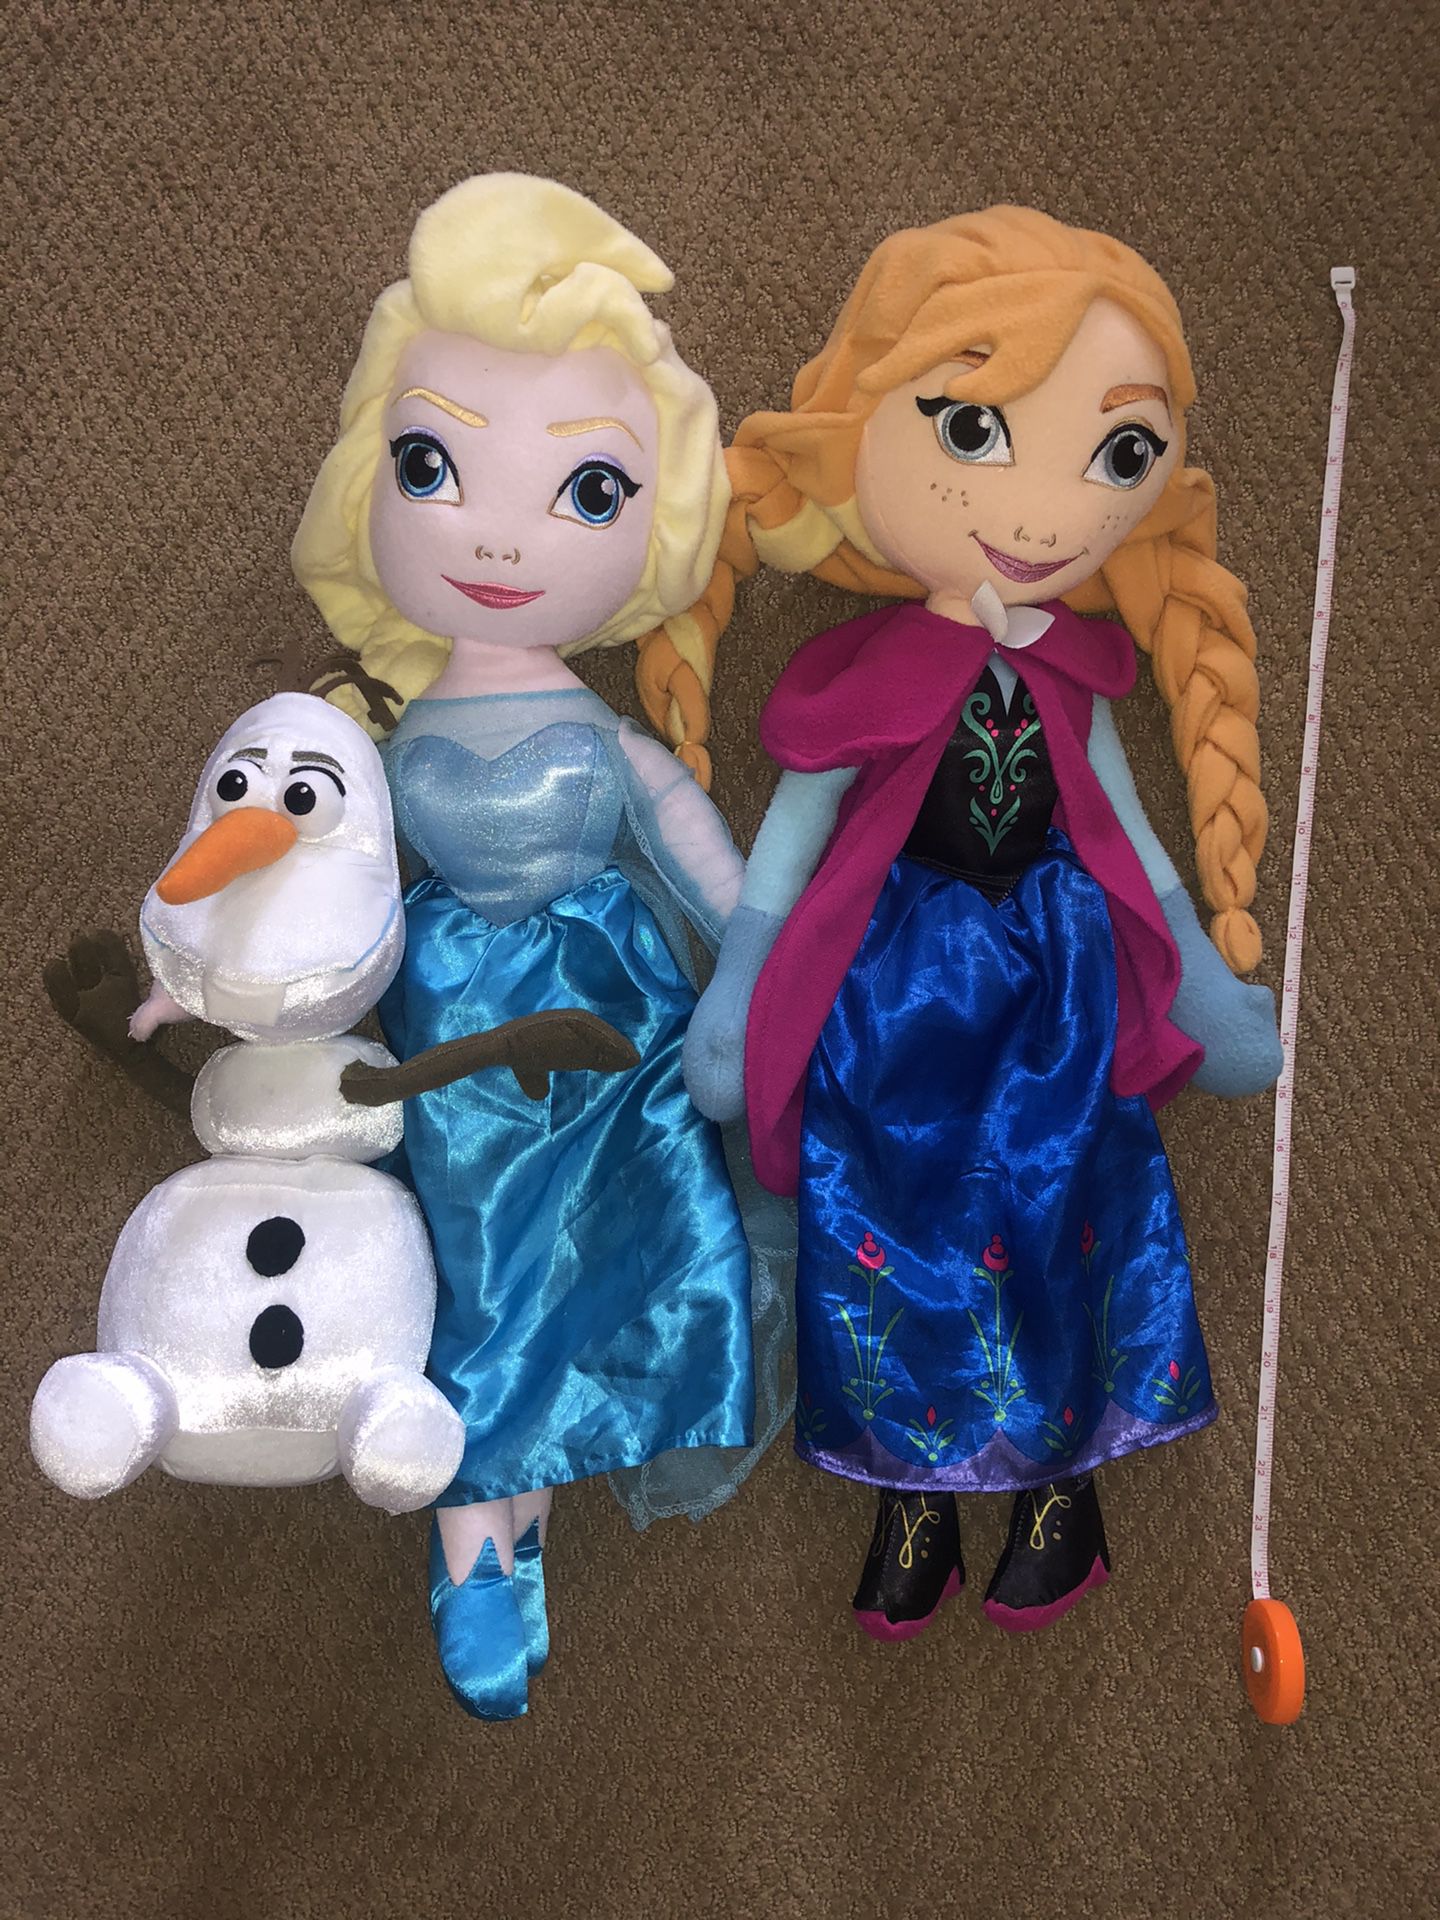 Musical 24” Frozen dolls with Elsa, Anna and Olaf